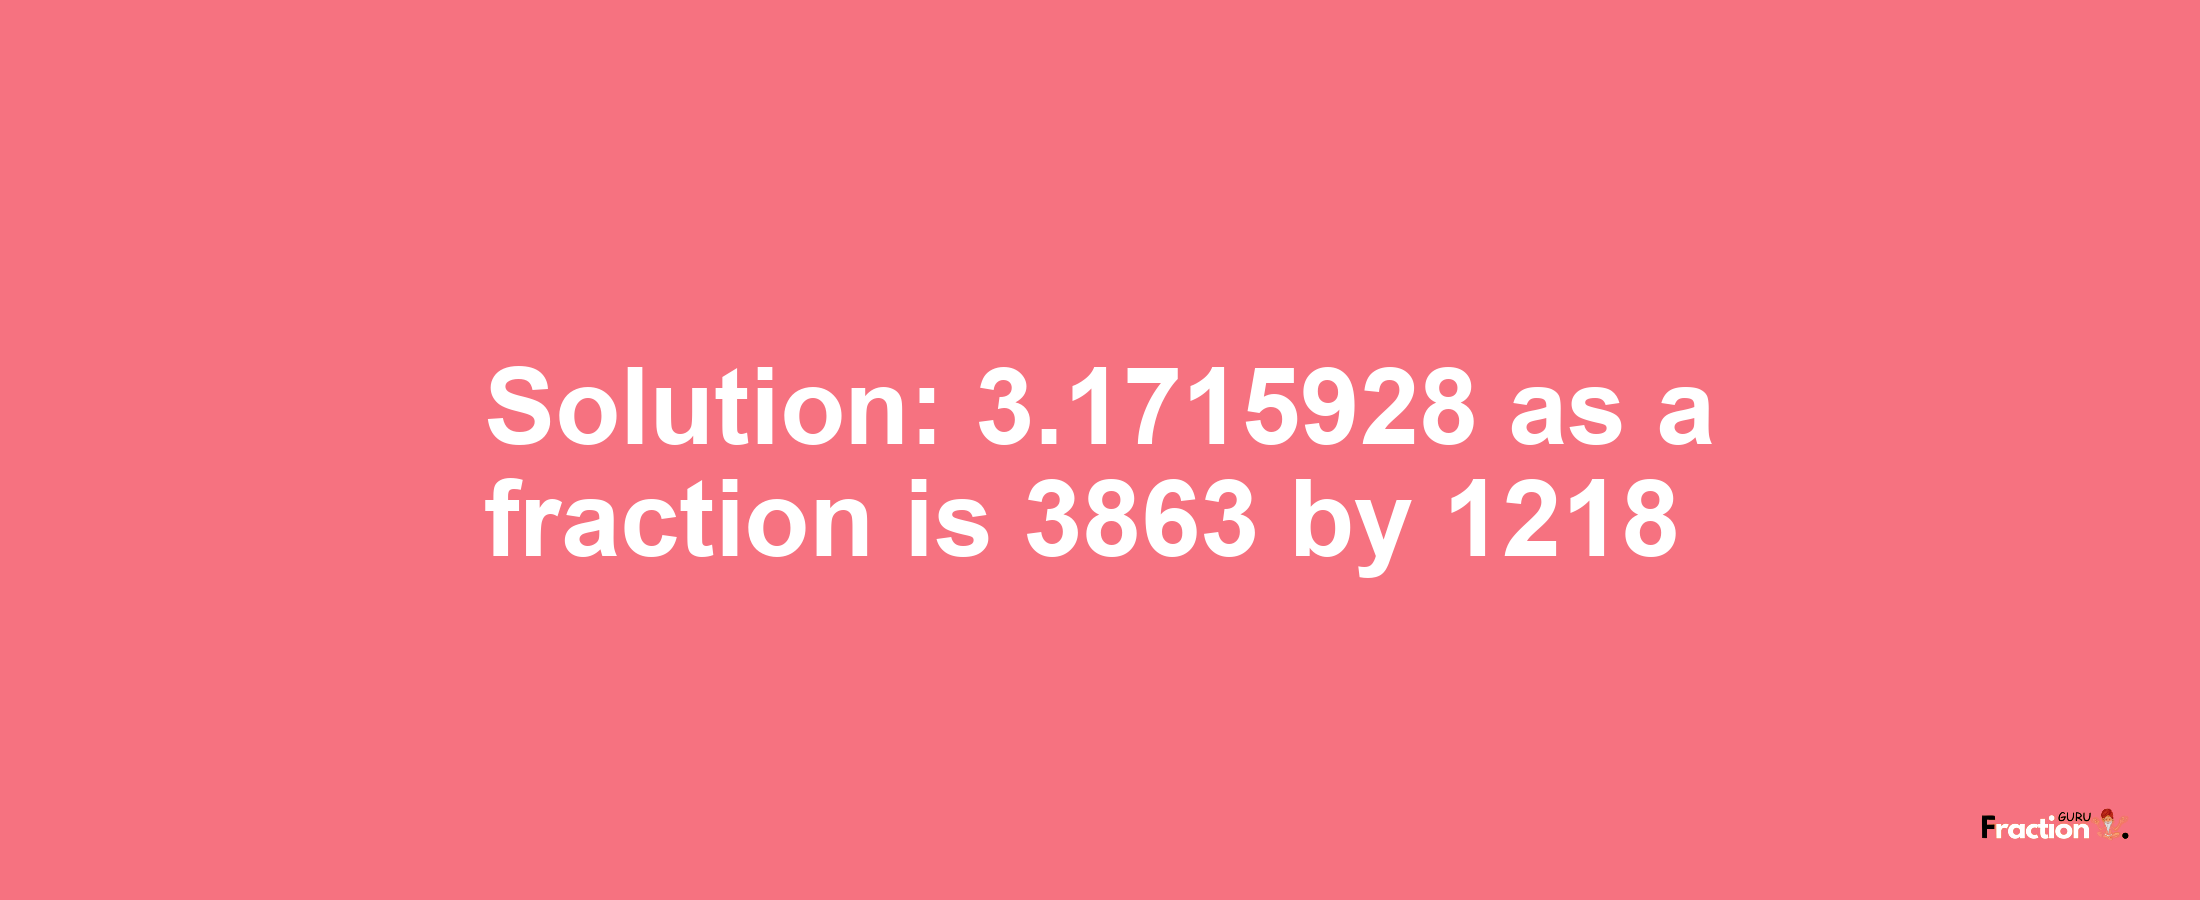 Solution:3.1715928 as a fraction is 3863/1218